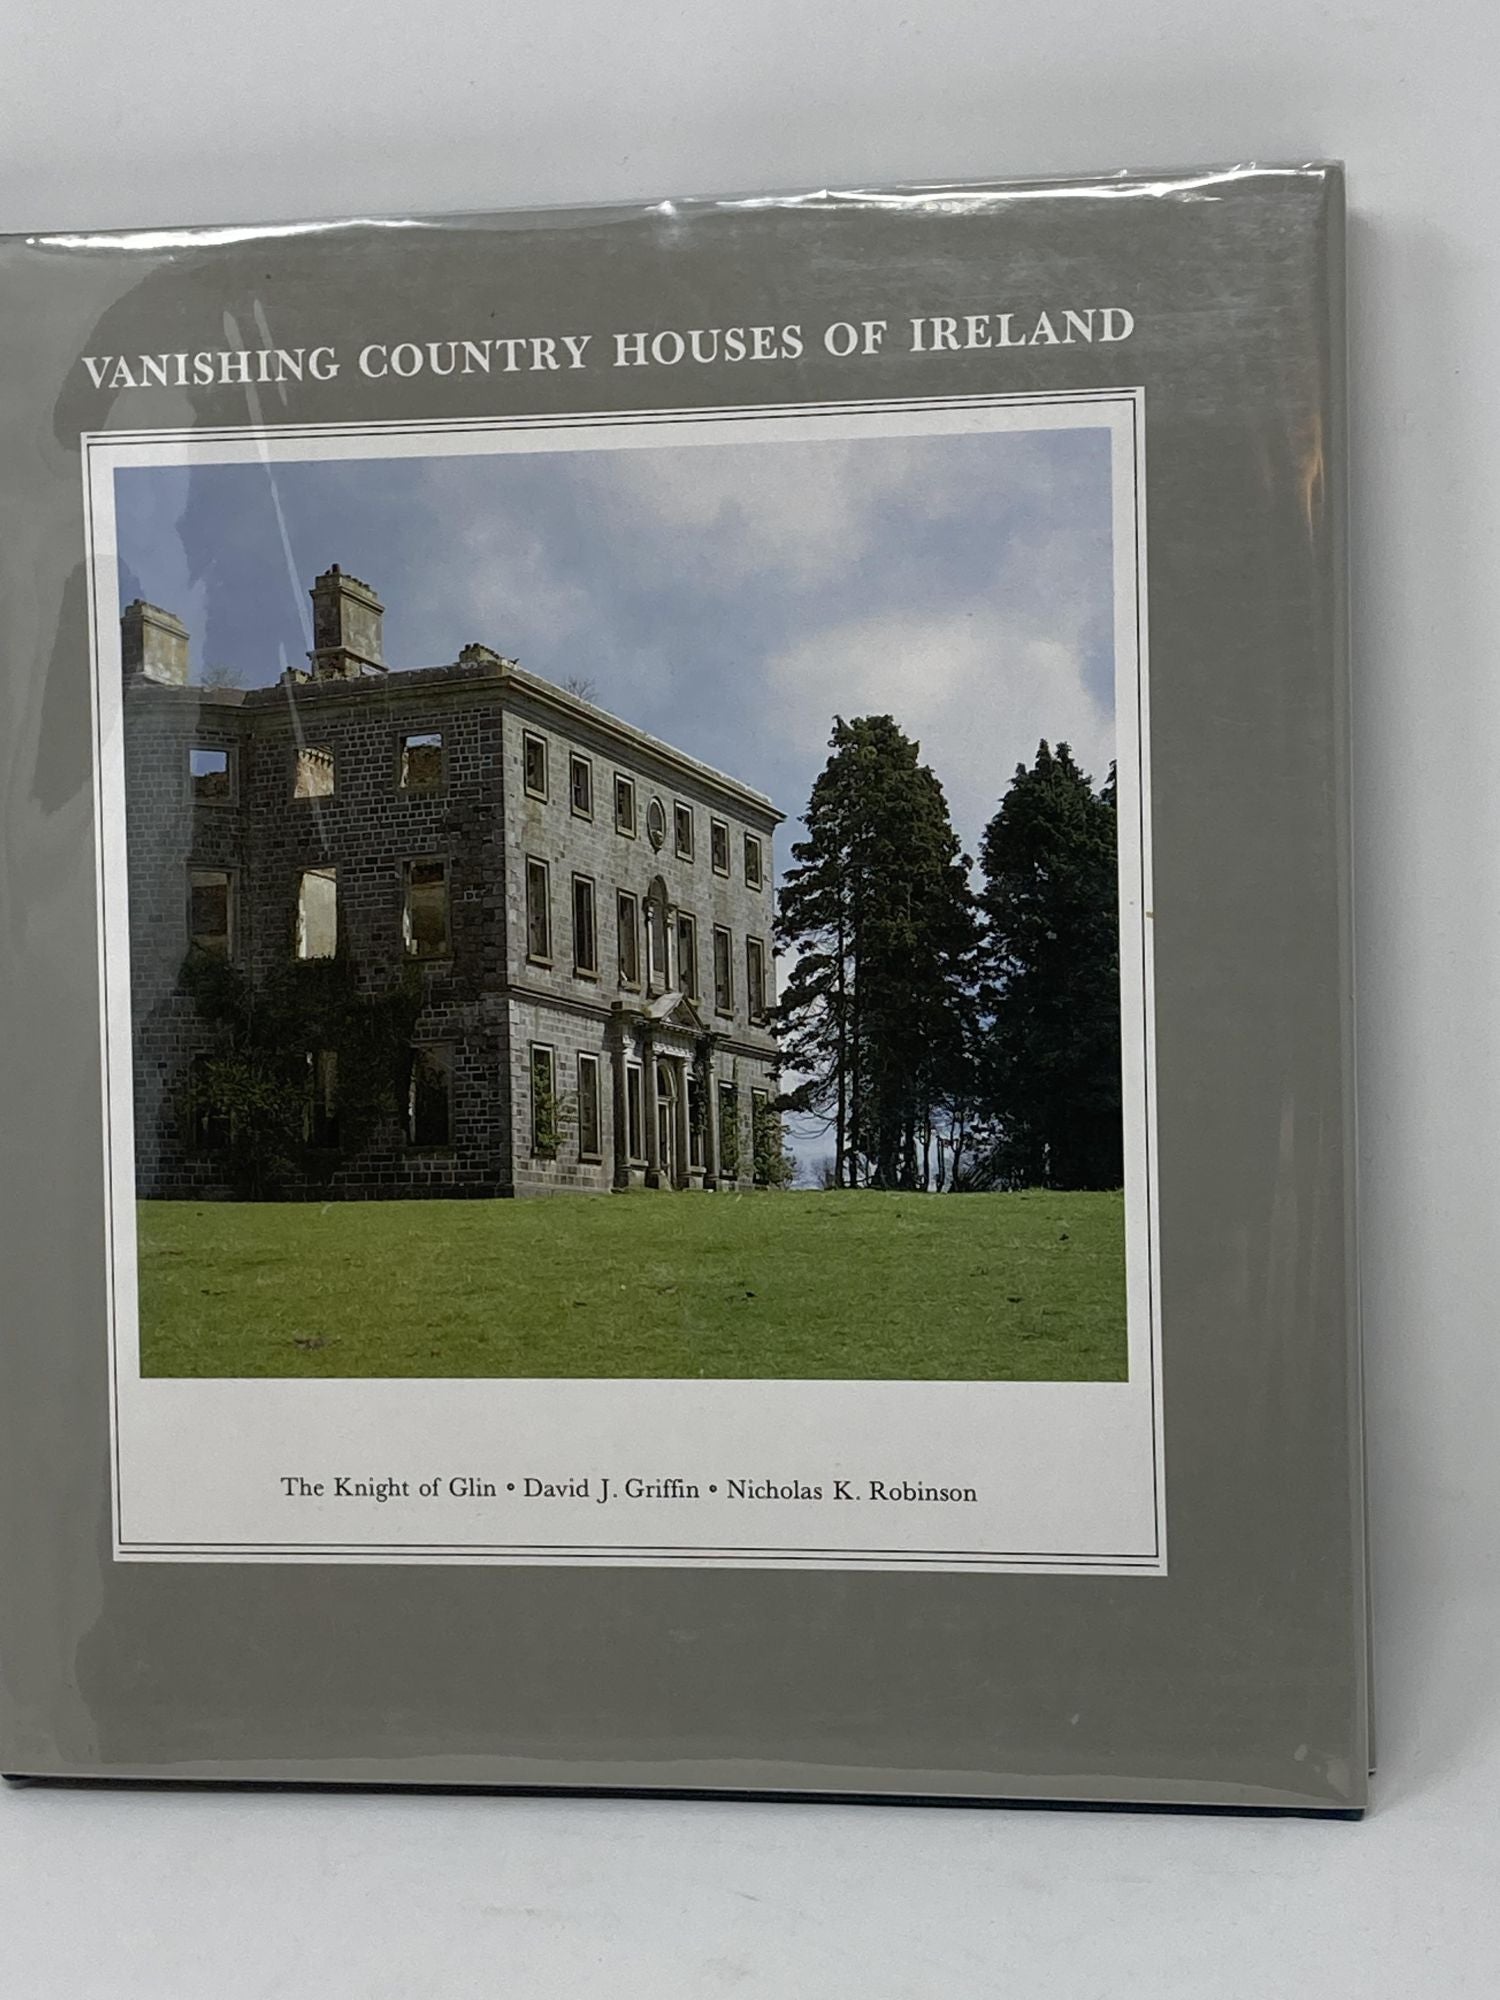 The Knight of Glin, Griffin, David J. and NIcholas K. Robinson - Vanishing Country Houses of Ireland